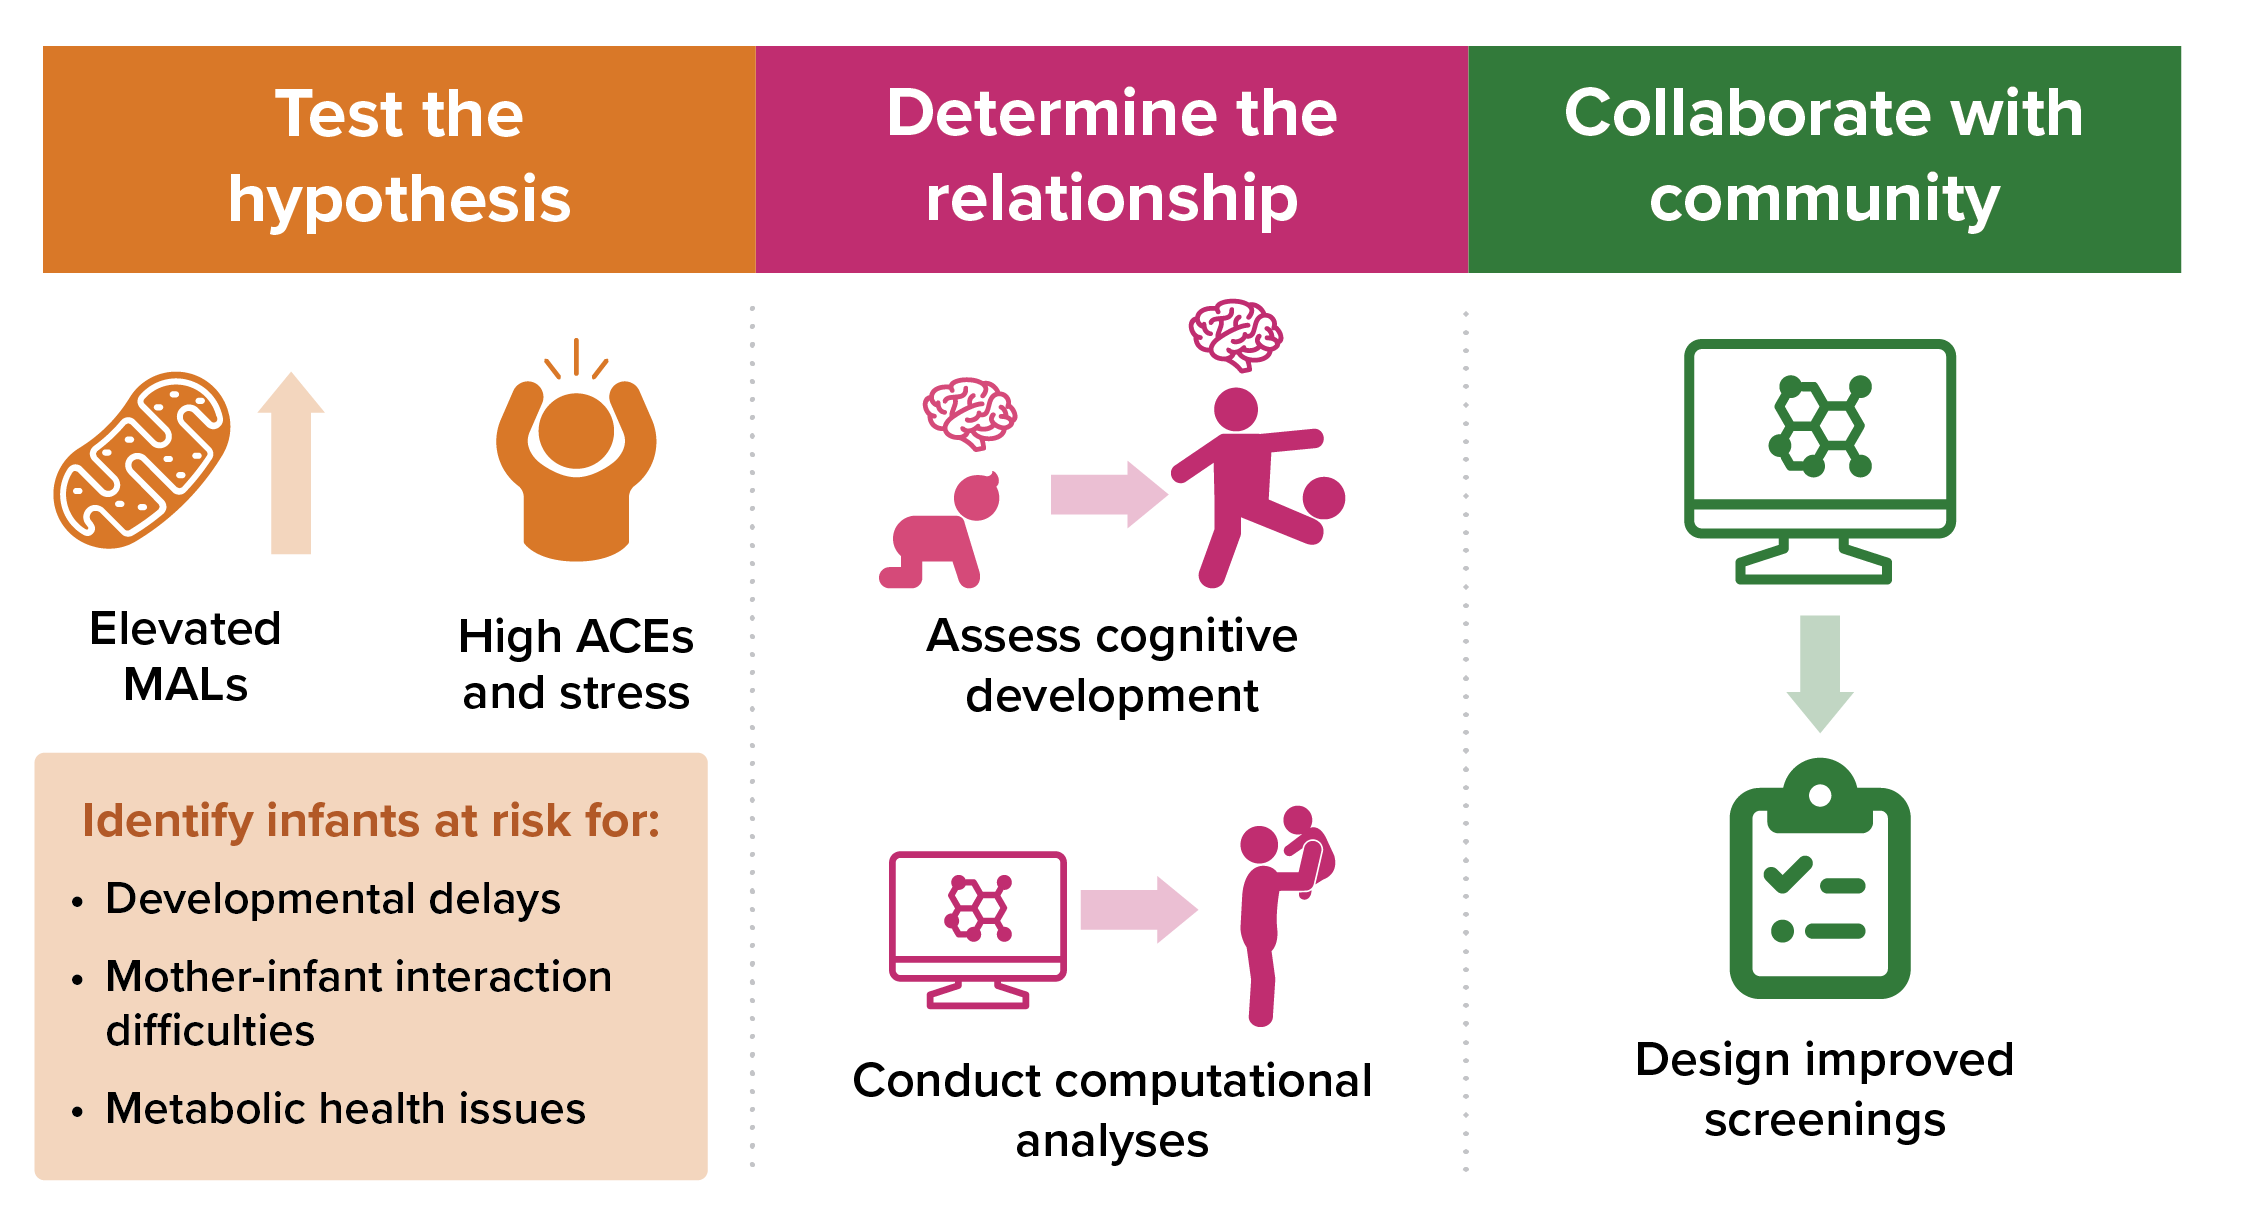 This graphic describes the project goals. The goals are to identify infants at risk for toxic stress by screening for an elevated metabolic biomarker known as mitochondrial allostatic load, determine if there is a relationship between toxic stress and cognitive development, and design improved screening tools based on these findings.